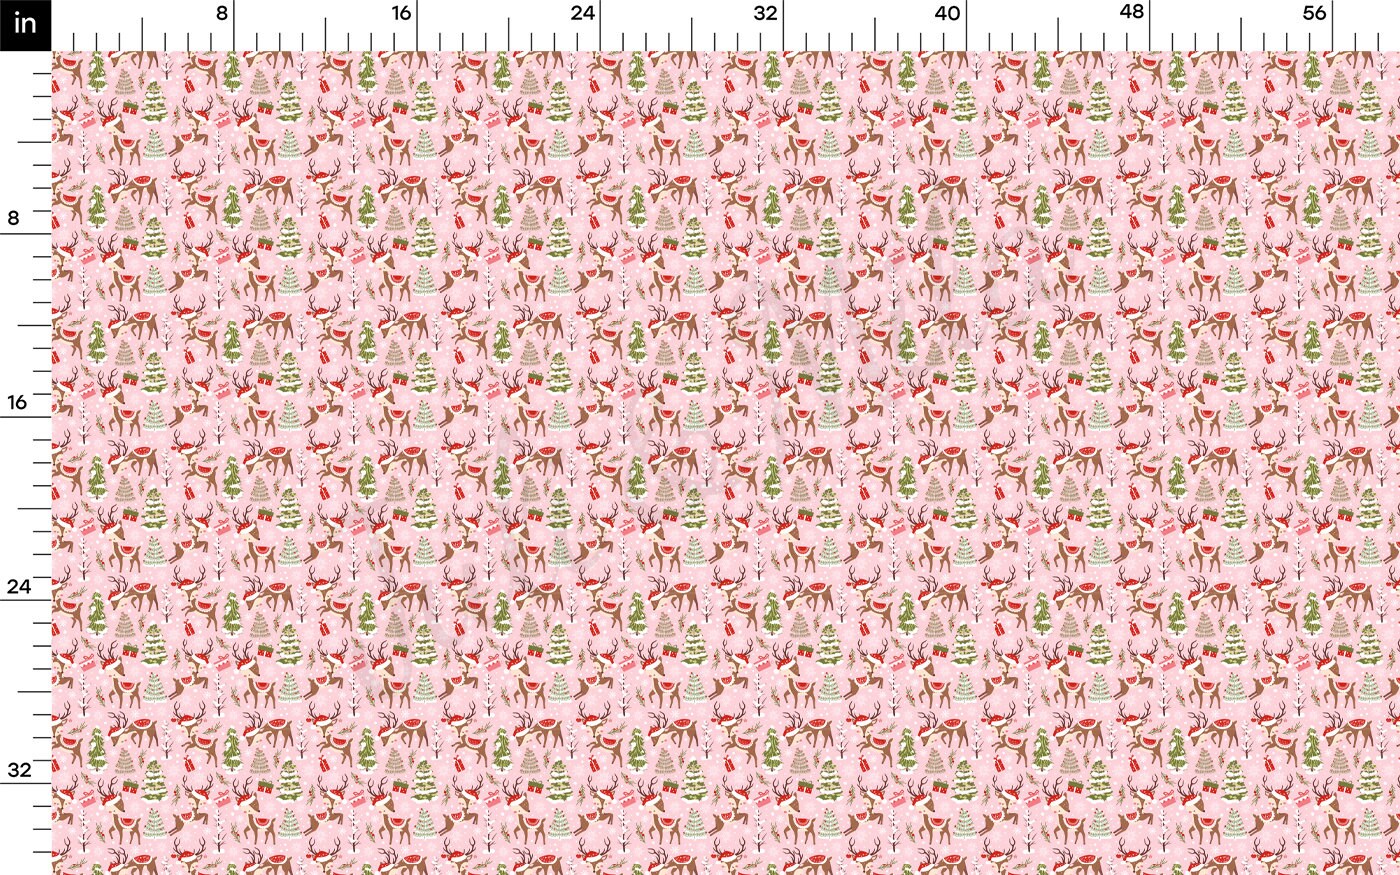 Christmas Rib Knit Fabric by the Yard Ribbed Jersey Stretchy Soft Polyester Stretch Fabric 1 Yard  RBK2182